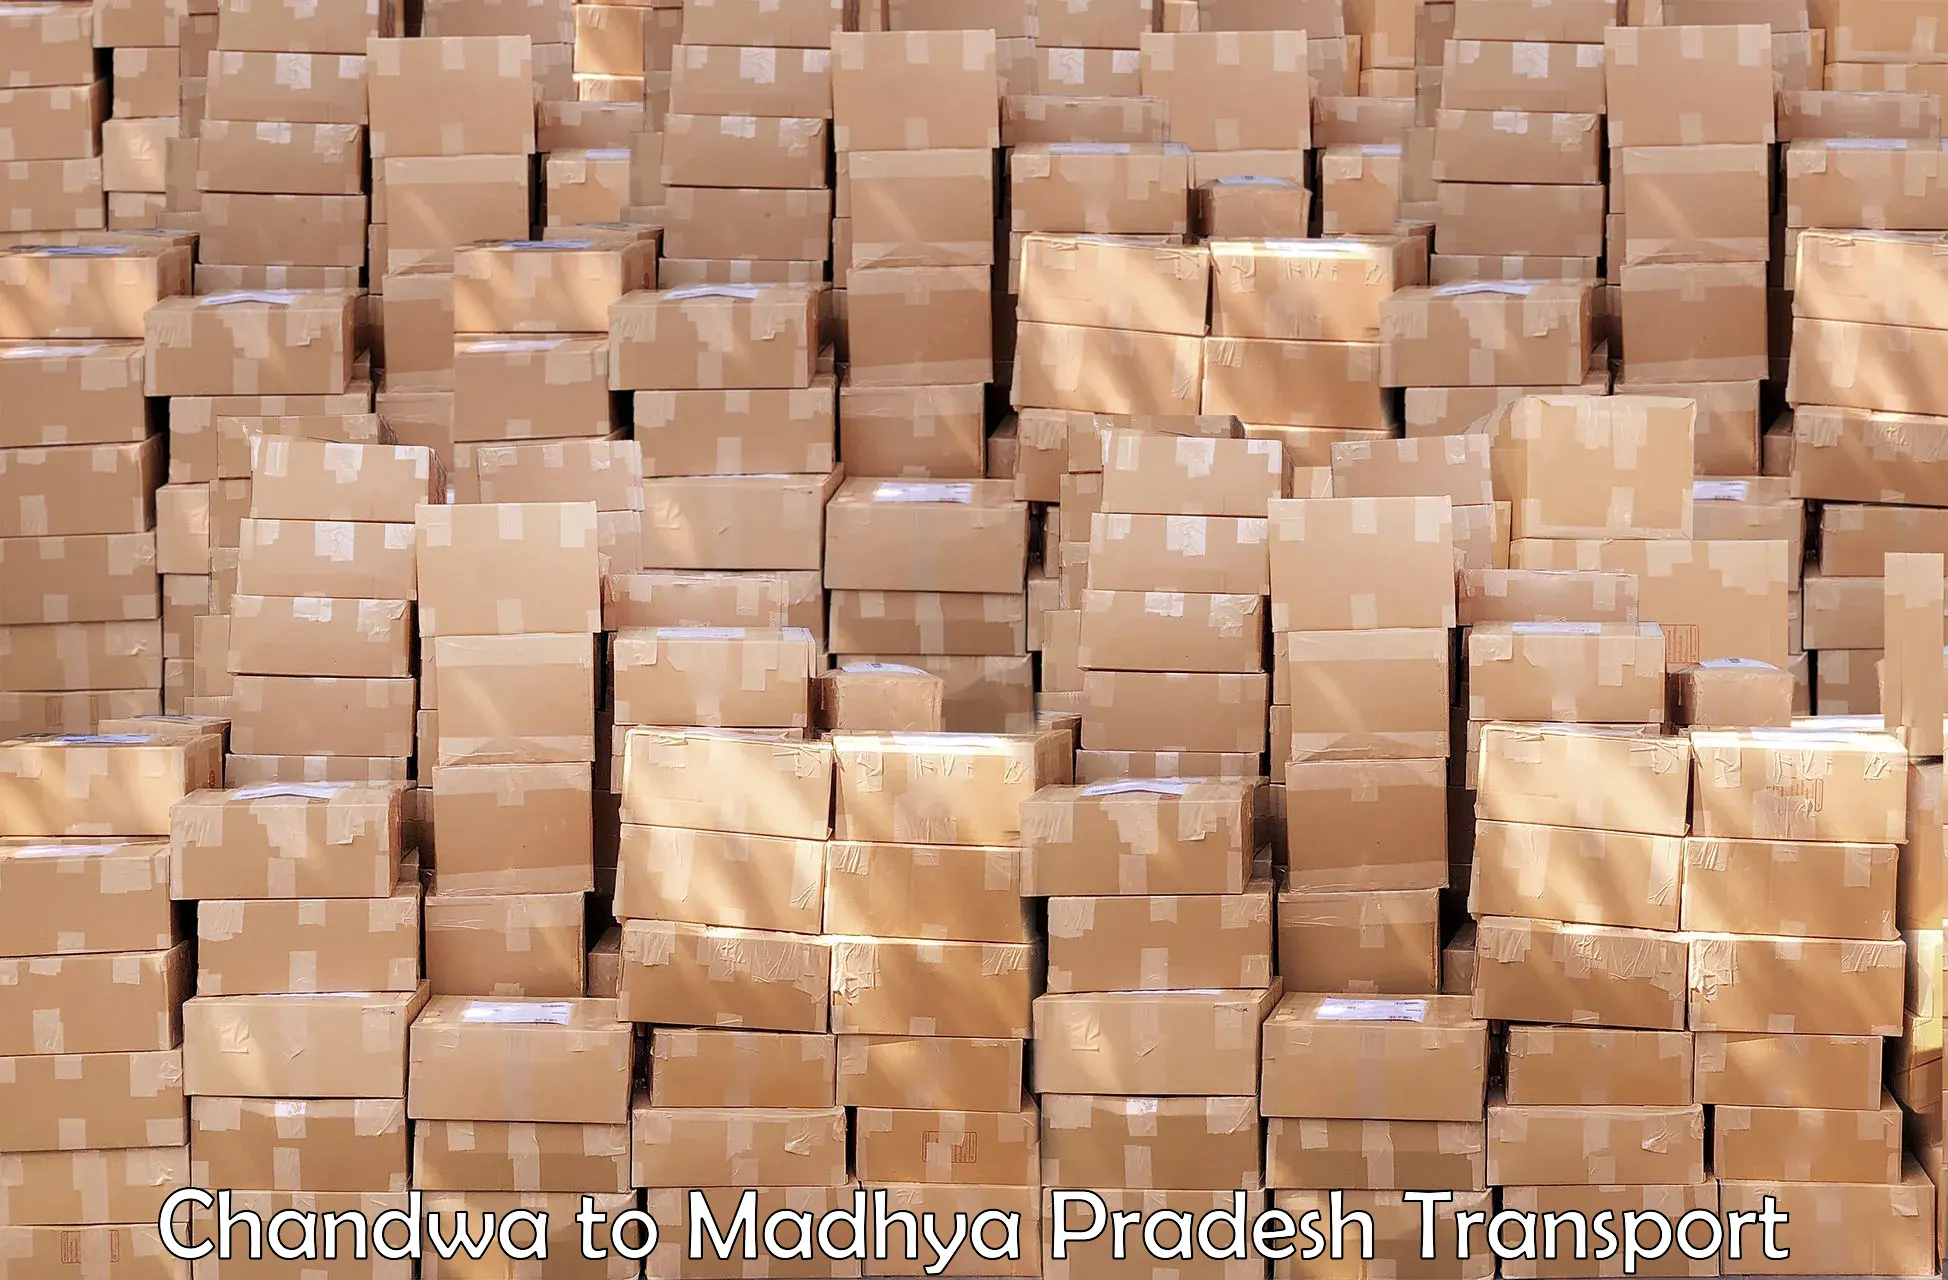 Daily parcel service transport Chandwa to Khategaon